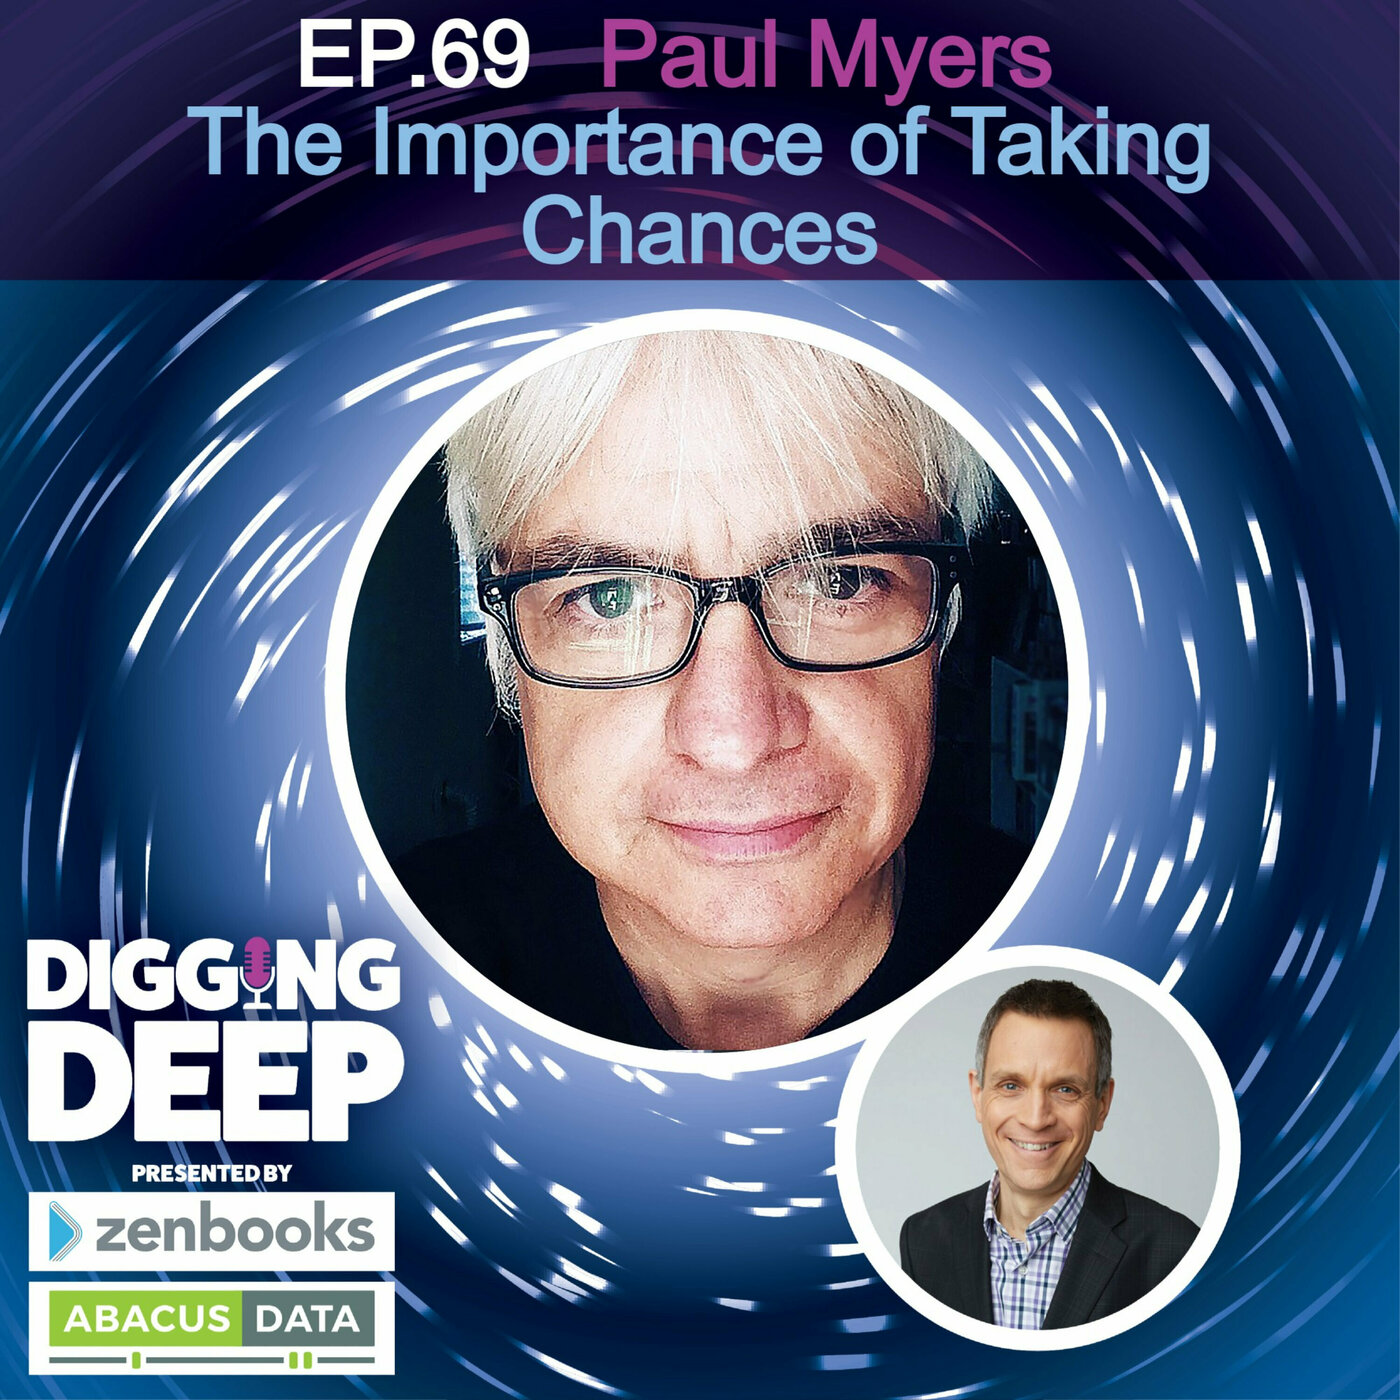 Paul Myers: The Importance of Taking Chances